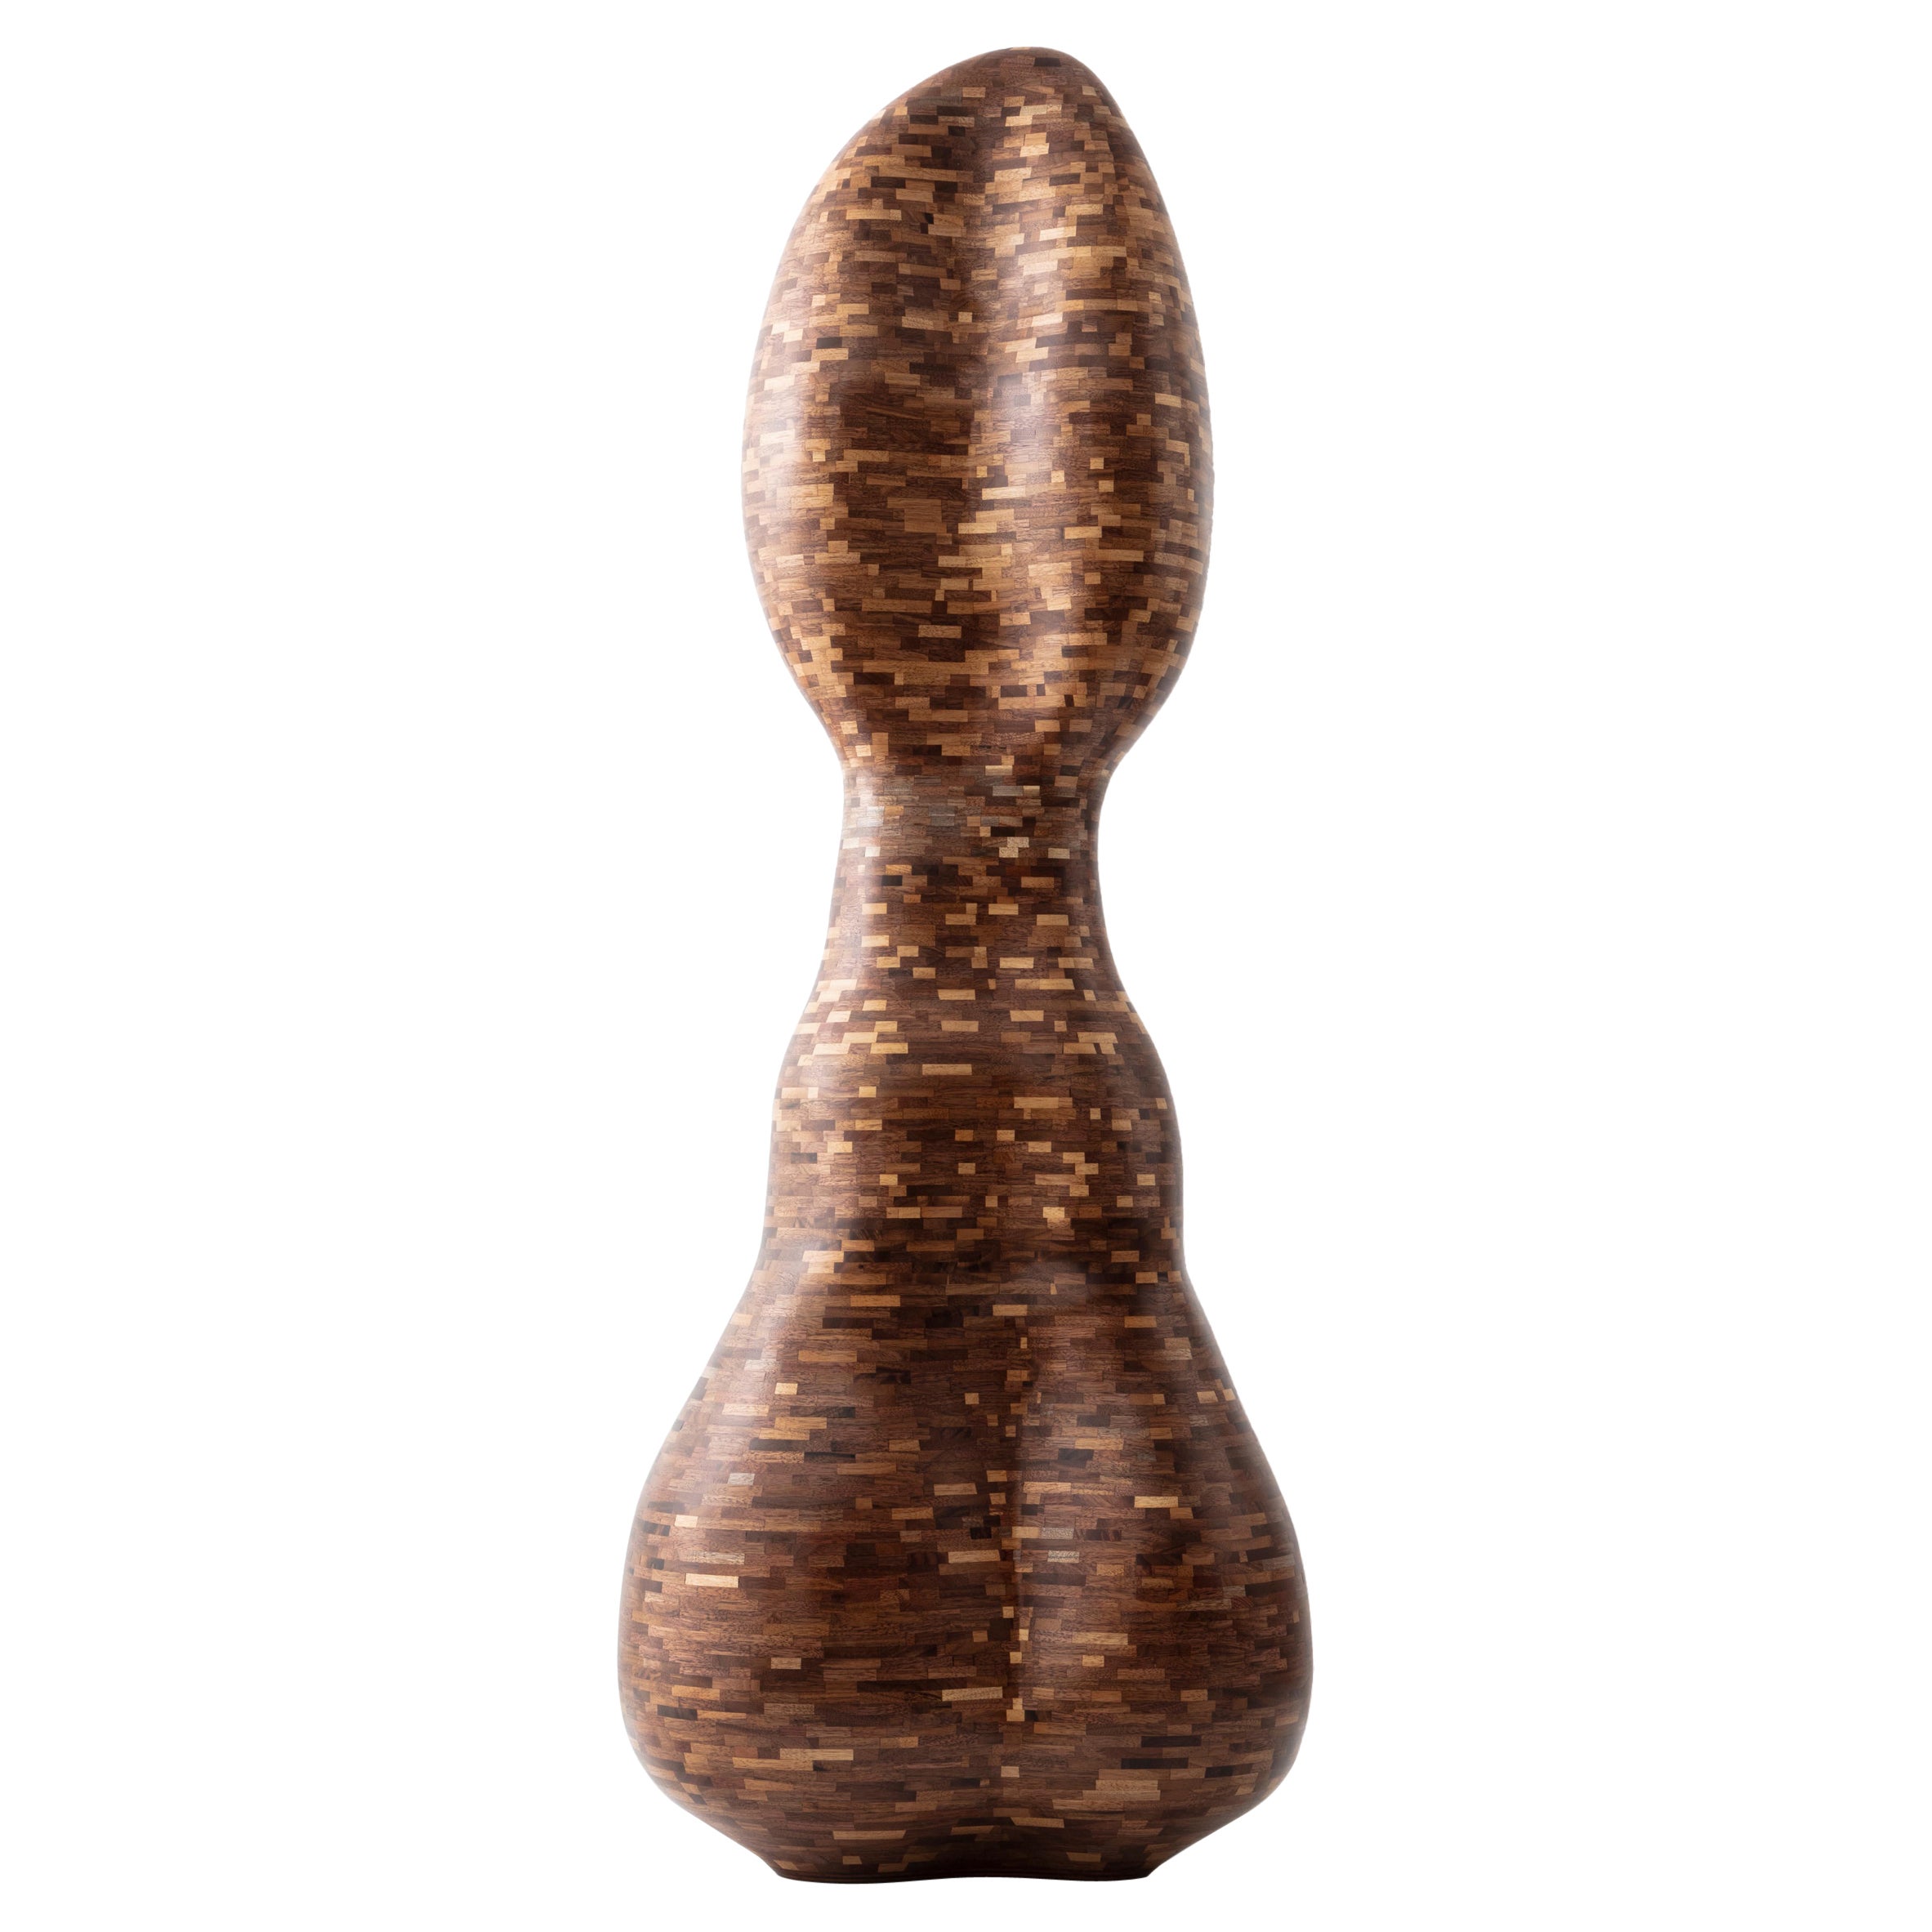 STACKED Sculpture No 5. Made of Salvaged Walnut by Richard Haining Available Now